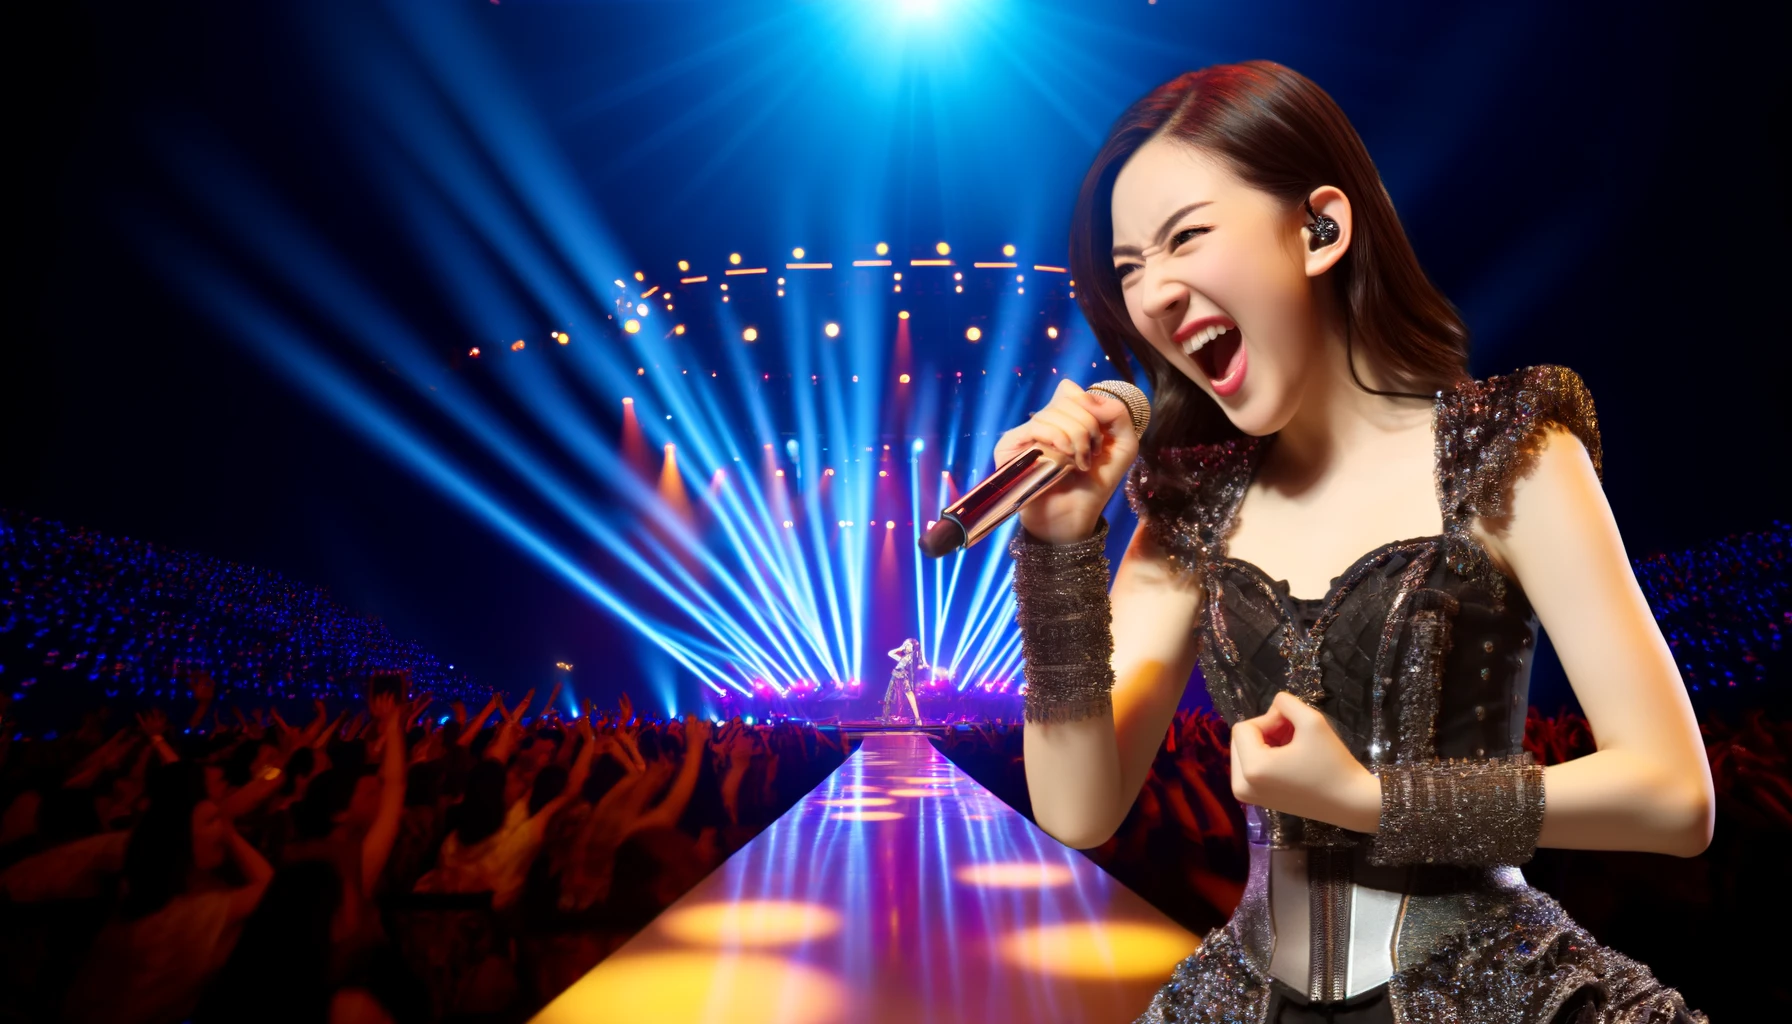 A dynamic concert scene featuring a young Asian female idol singing powerfully at the center of the stage. She has an expressive face, showcasing her outstanding vocal talent. She wears a striking, glamorous outfit that sparkles under the stage lights. The background is filled with an excited audience and a beautifully lit stage with vibrant lights and visual effects, creating an immersive live performance atmosphere. The image captures the energy and charisma of the idol, highlighting her as the star of the show.